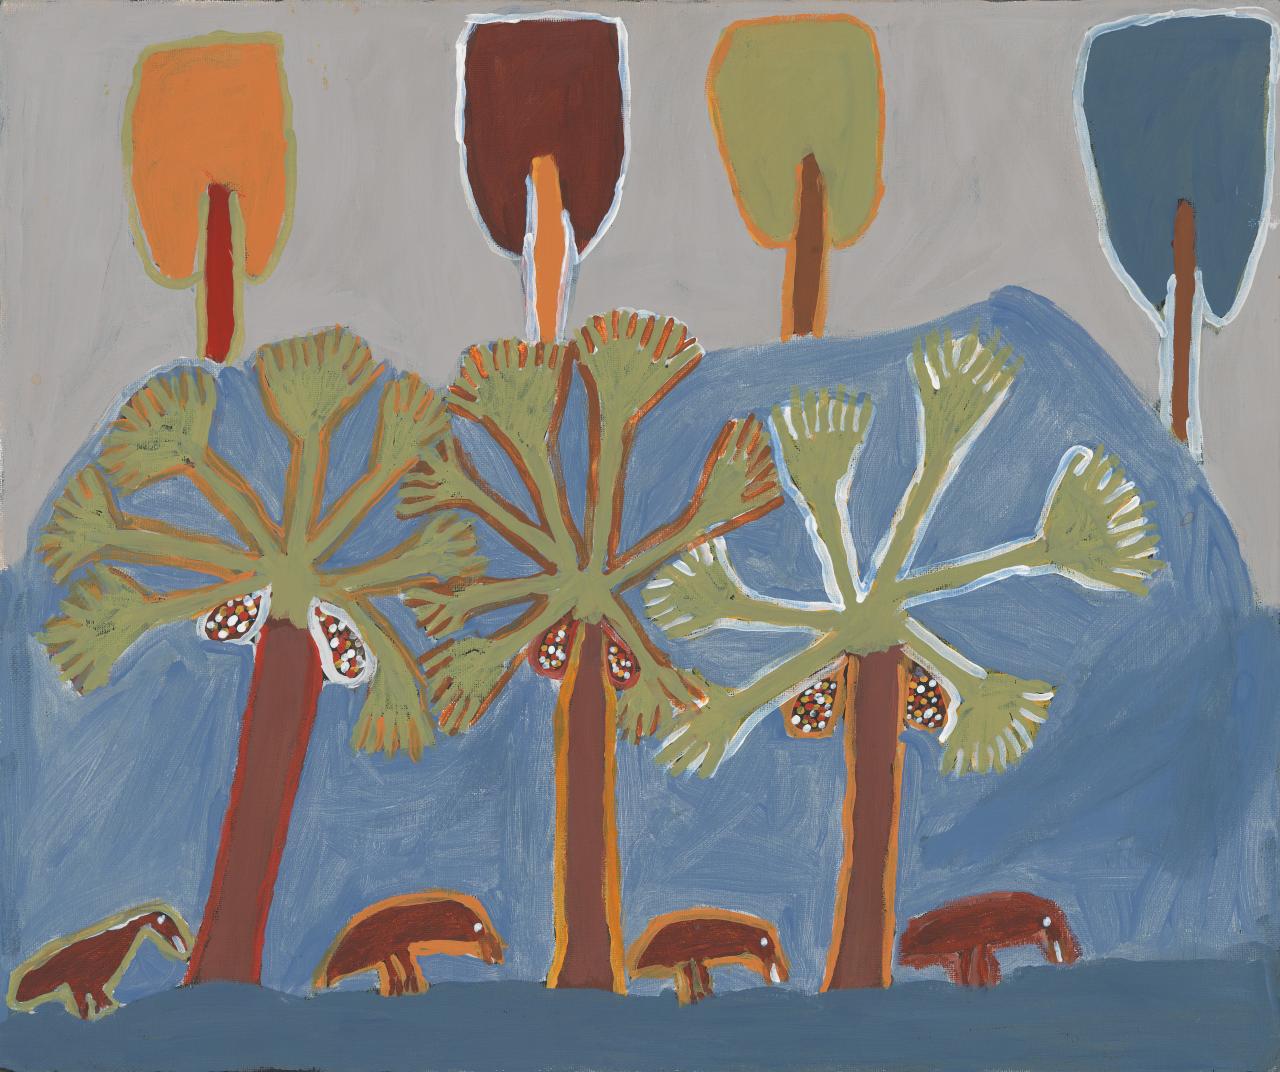  Margaret Rarru,  Birds and Trees,  synthetic polymer paint on canvas, 50.8 × 61.2 cm, 2010. (National Gallery of Victoria) 